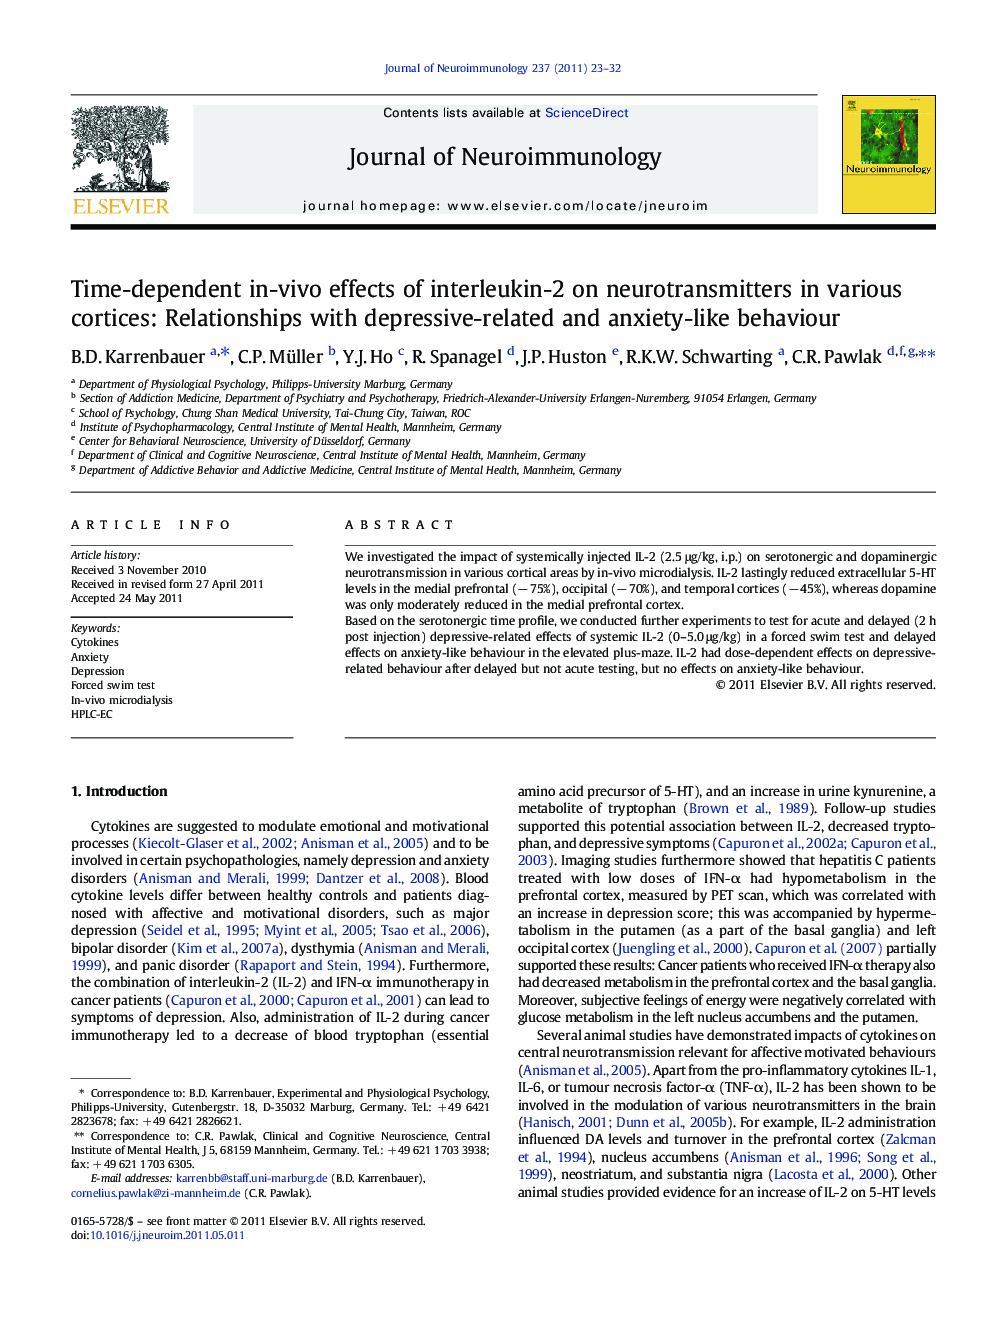 Time-dependent in-vivo effects of interleukin-2 on neurotransmitters in various cortices: Relationships with depressive-related and anxiety-like behaviour